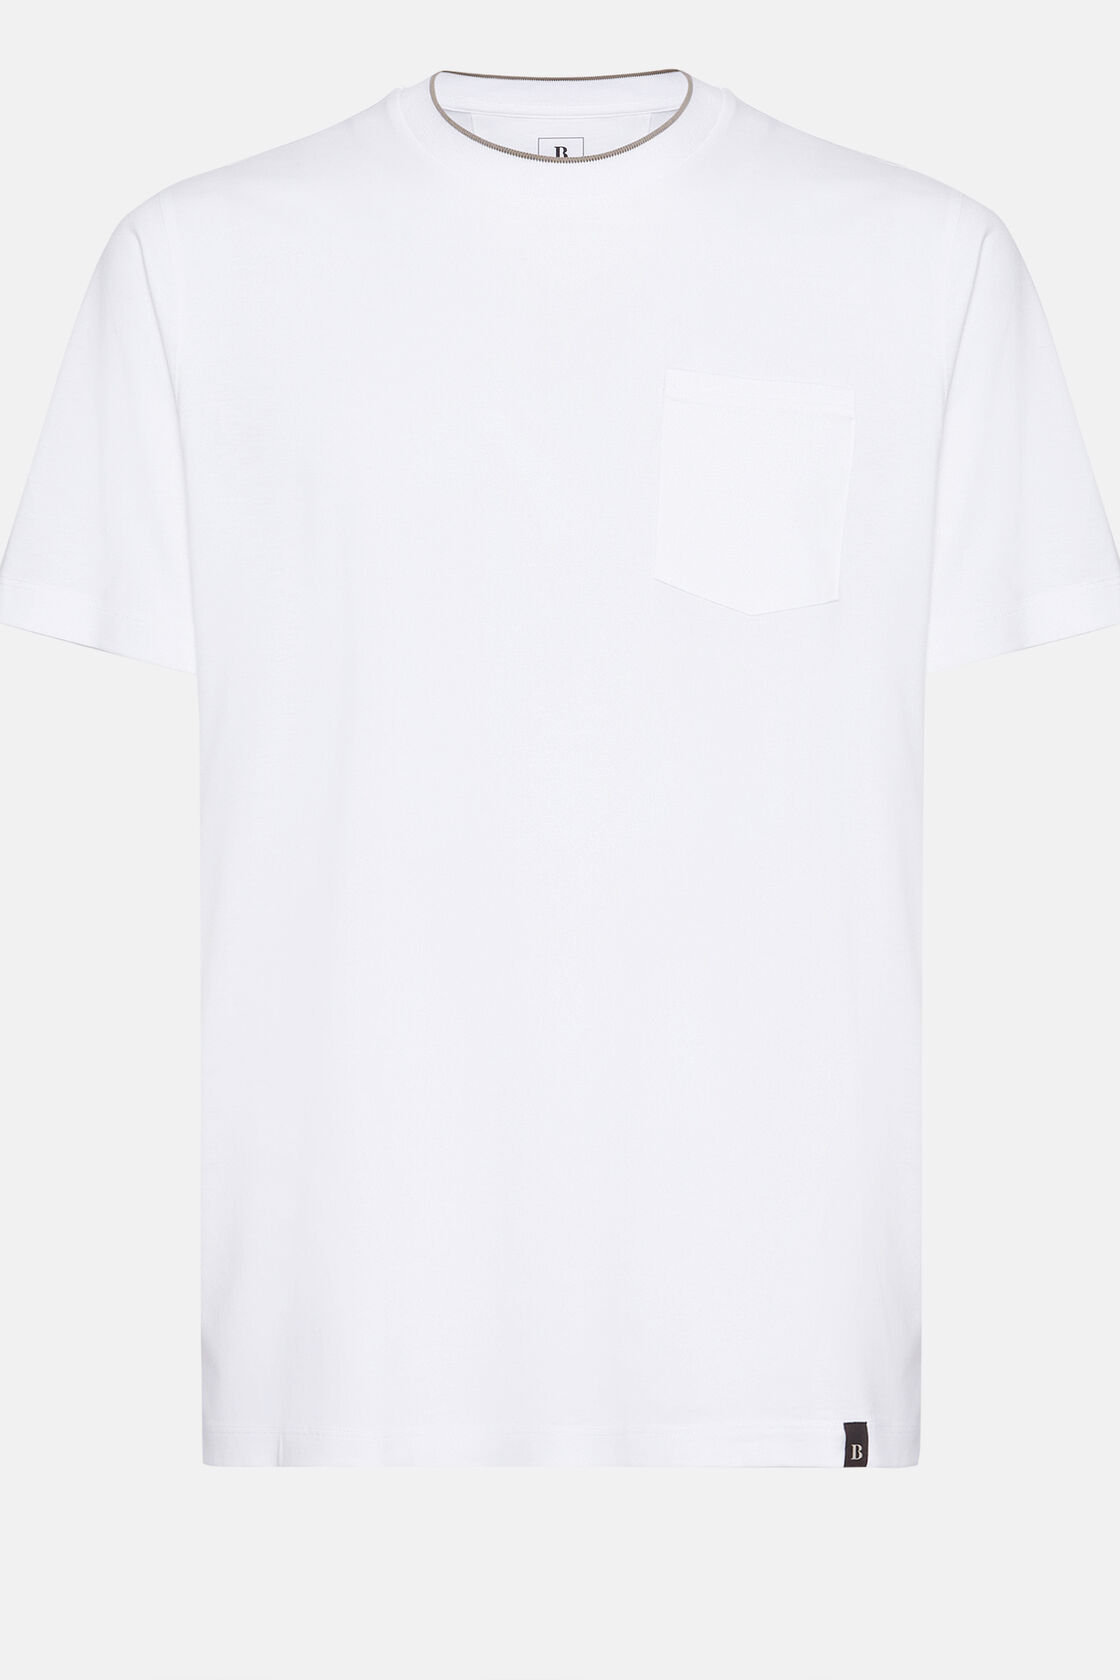 T-Shirt in Cotton and Tencel Jersey, White, hi-res